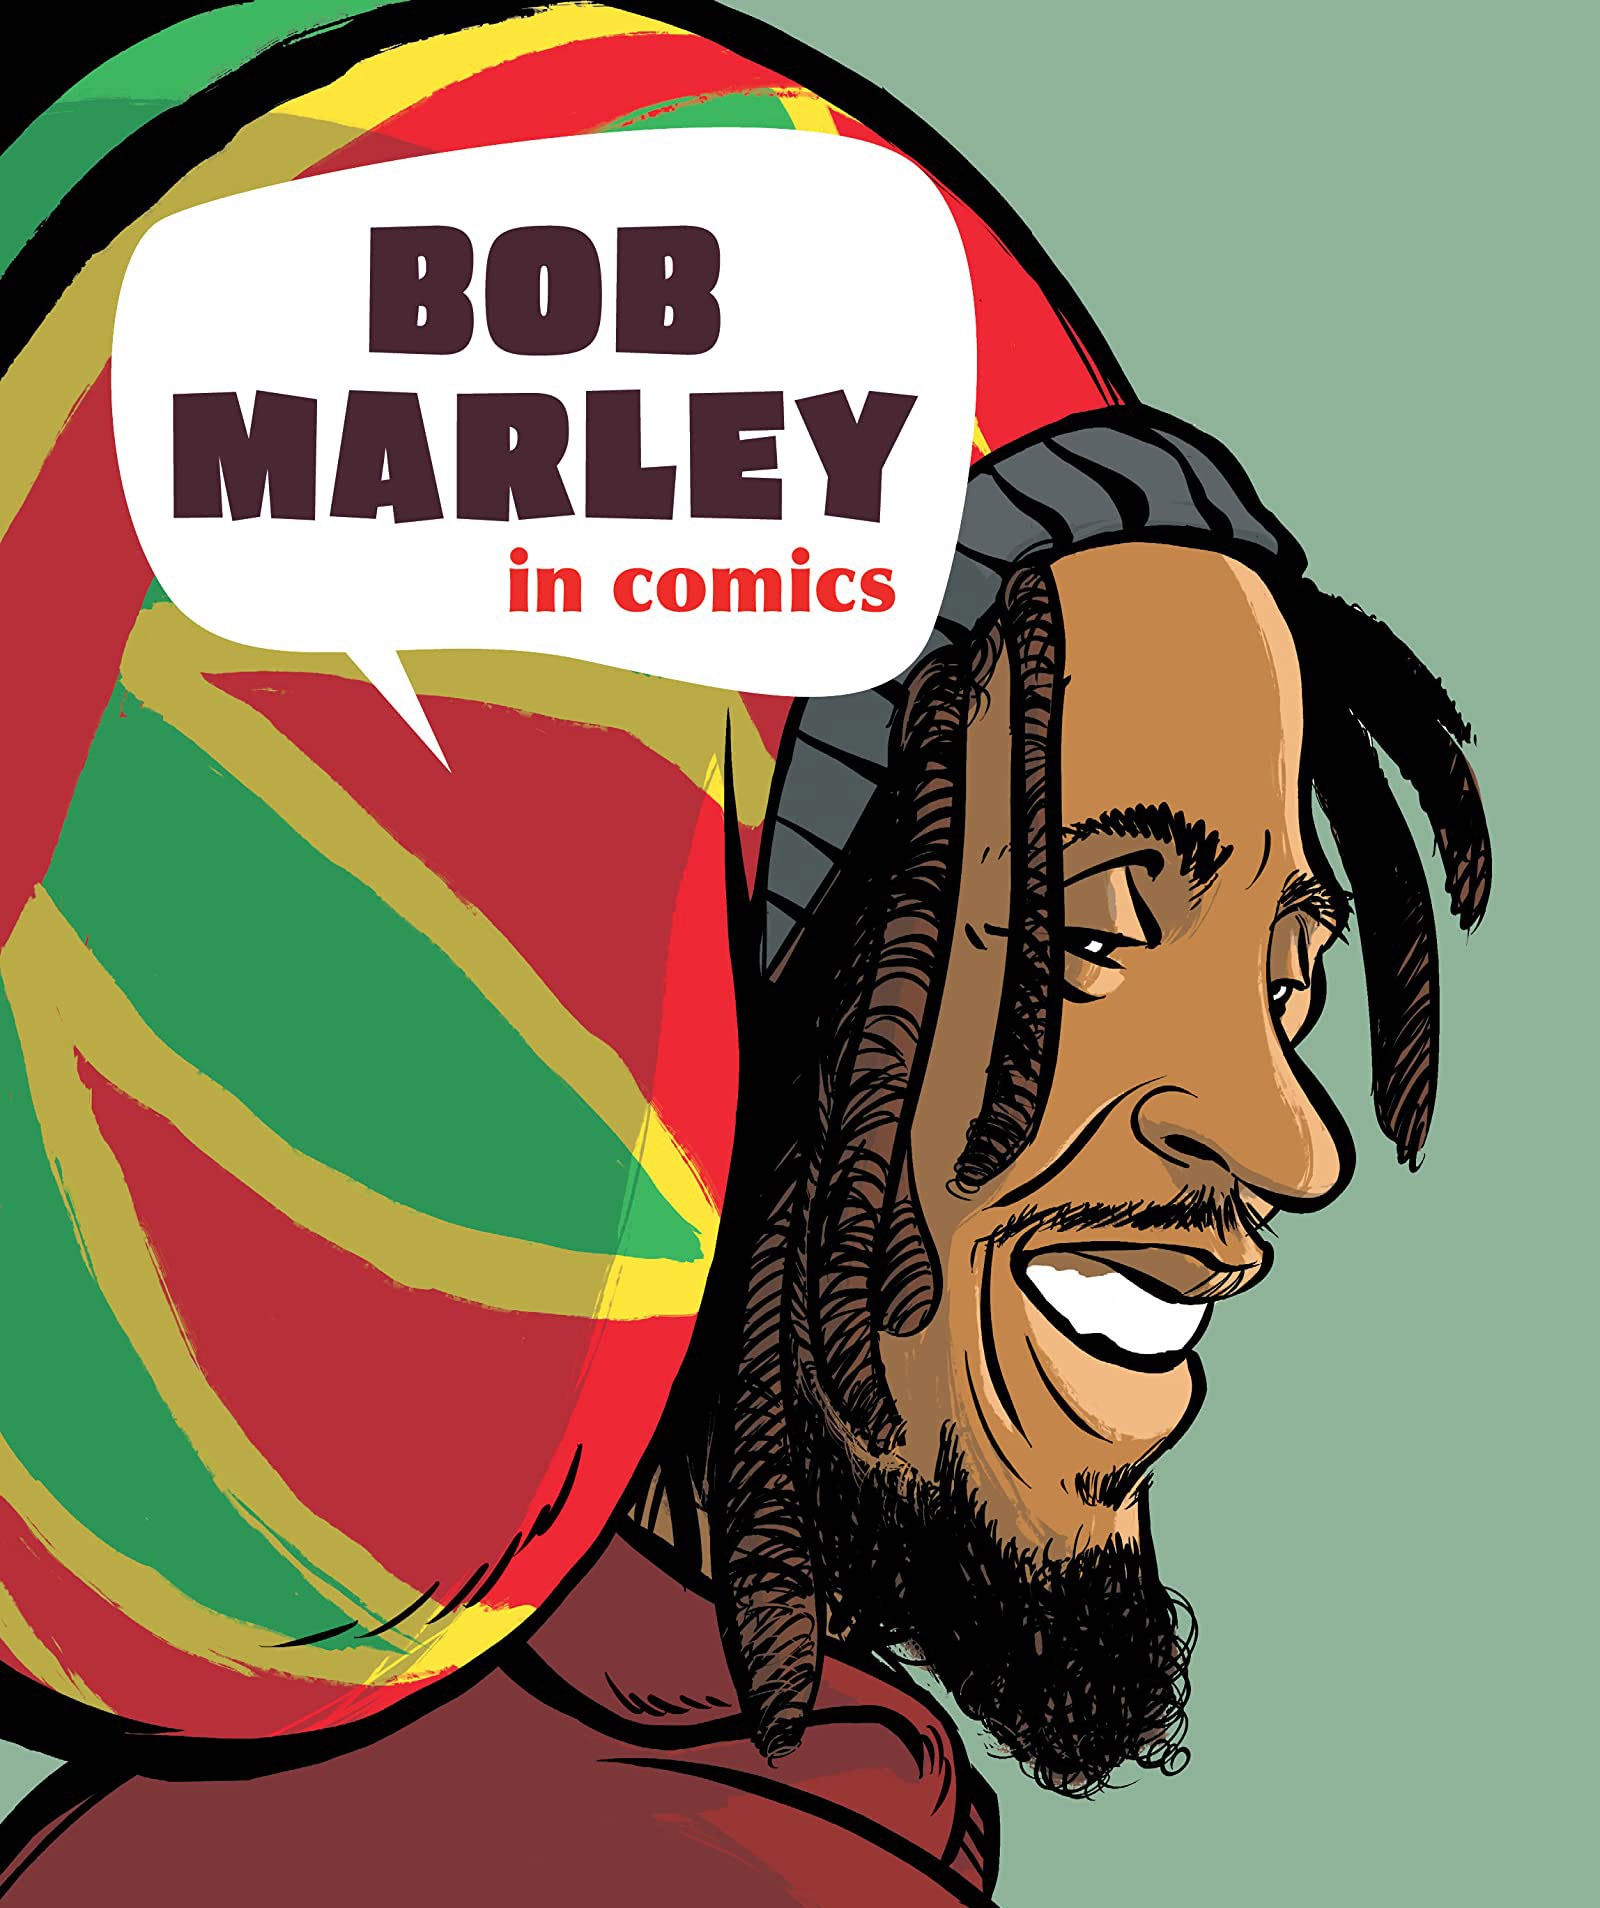 BOOK REVIEW: Bob Marley in Comics by Sophie Blitman and Gaet's 